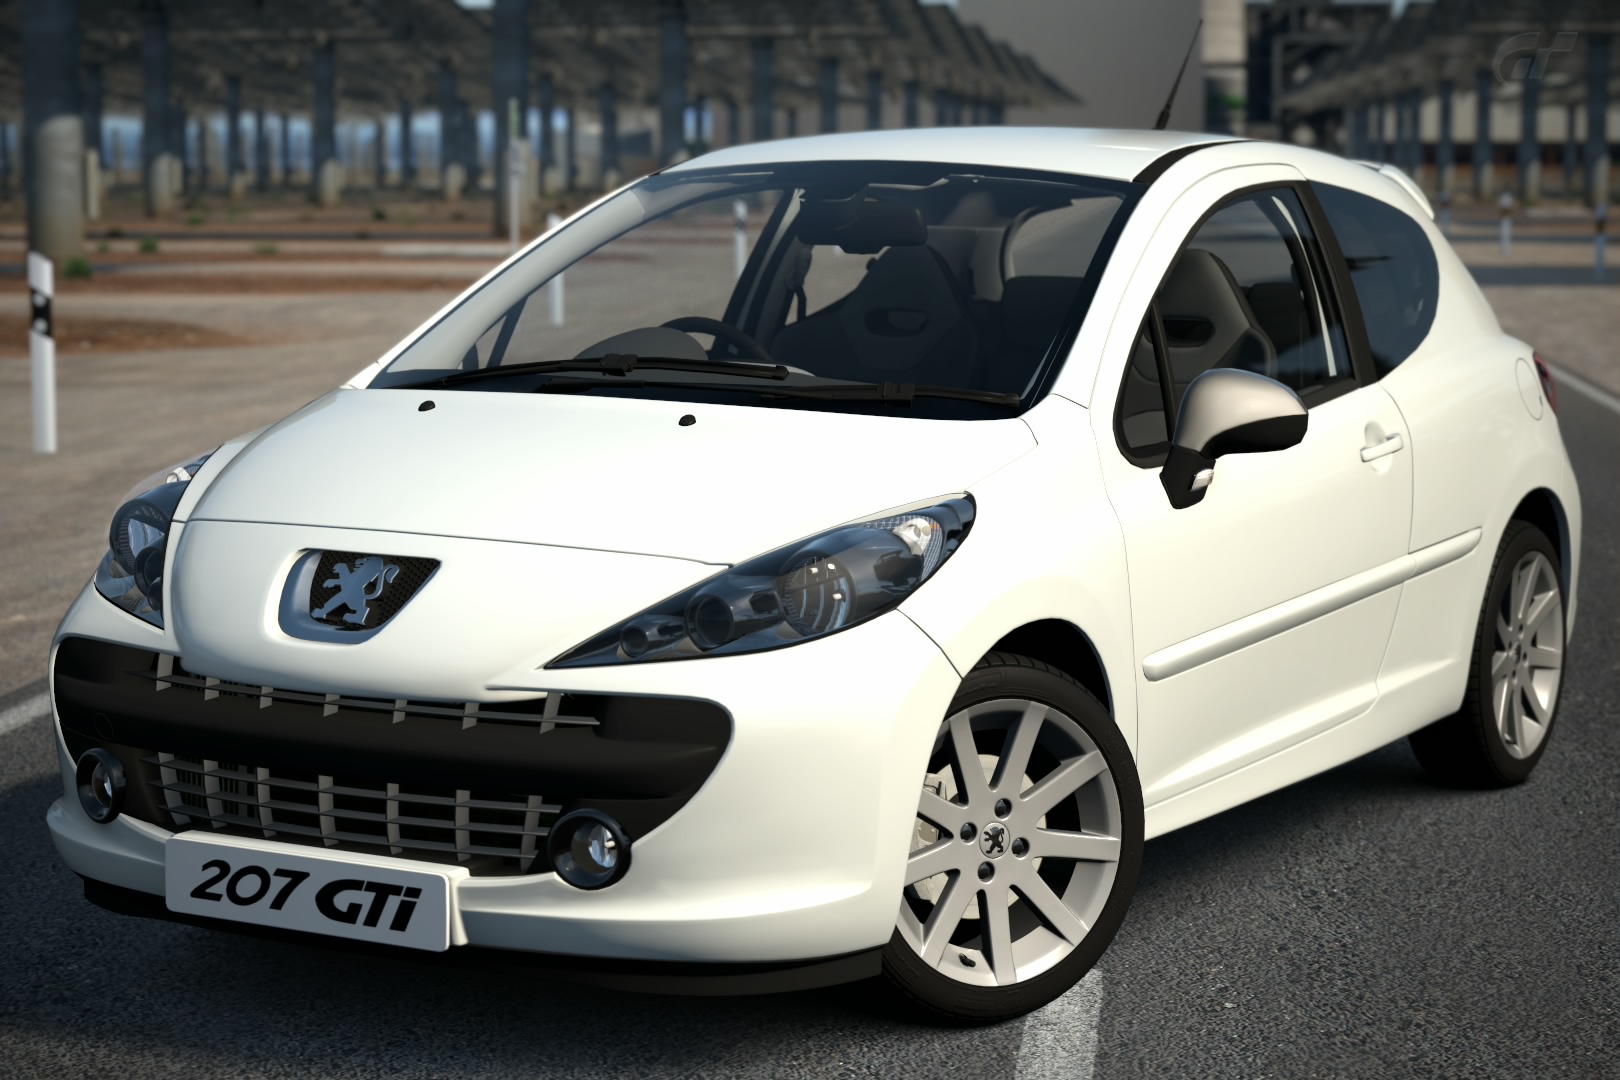 https://static.wikia.nocookie.net/gran-turismo/images/a/ae/Peugeot_207_GTi_%2707.jpg/revision/latest?cb=20190131151602